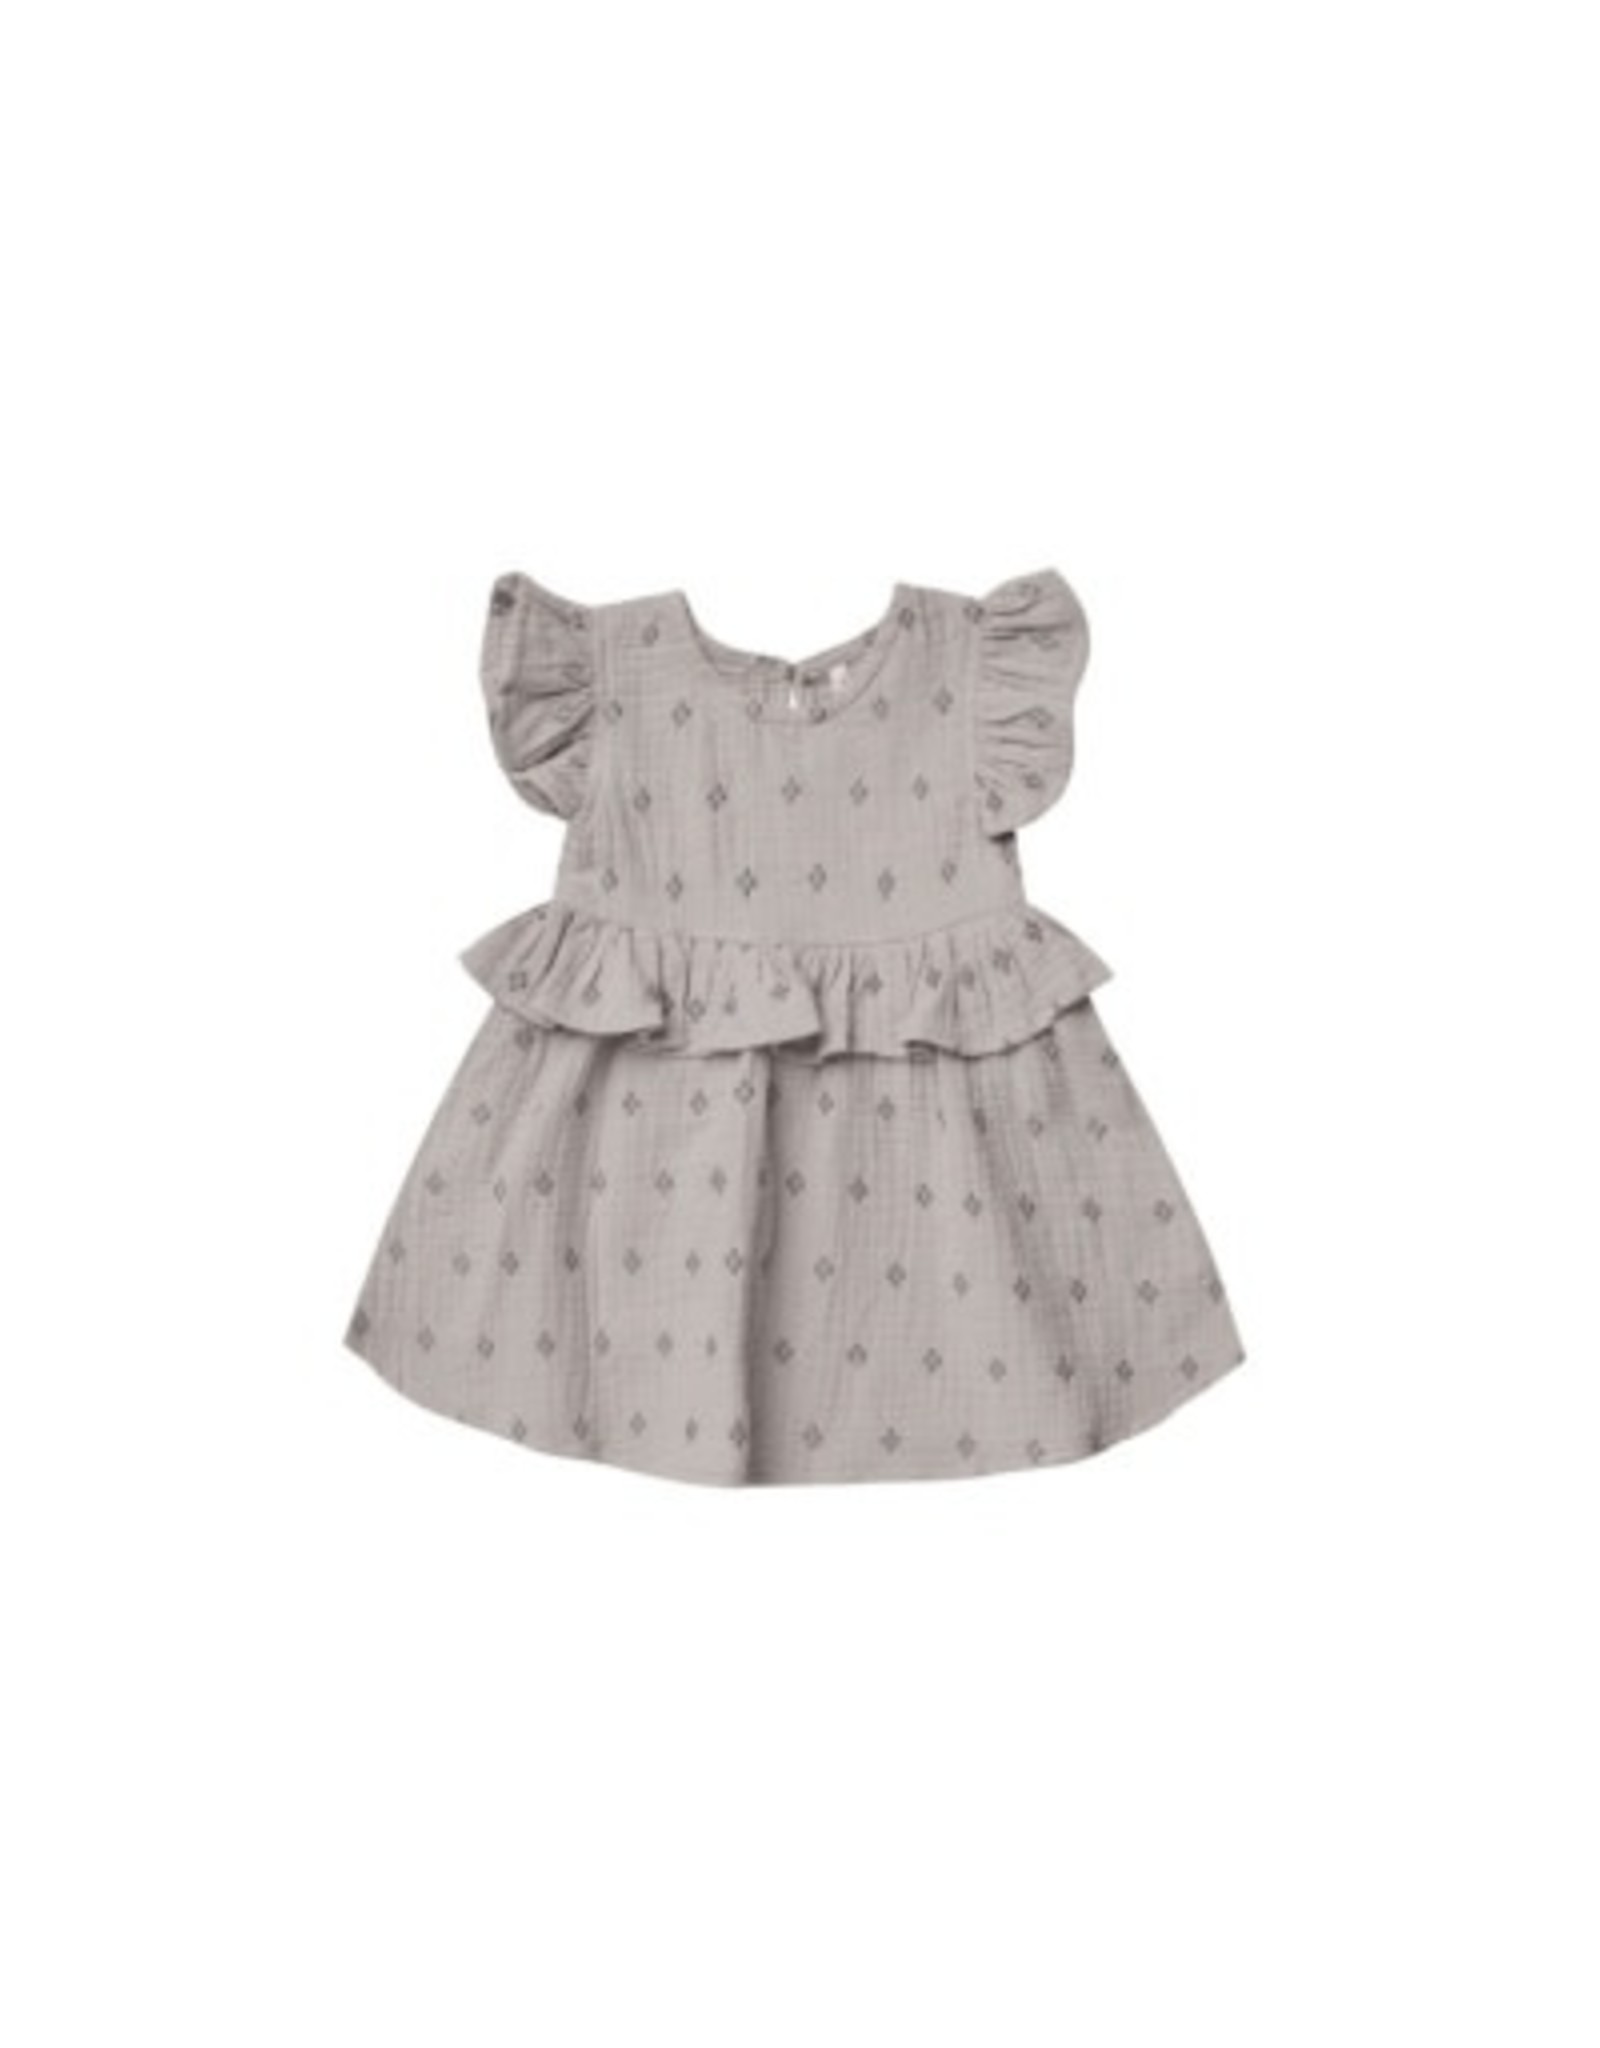 Rylee and Cru BRIELLE DRESS || GEO EMBROIDERY